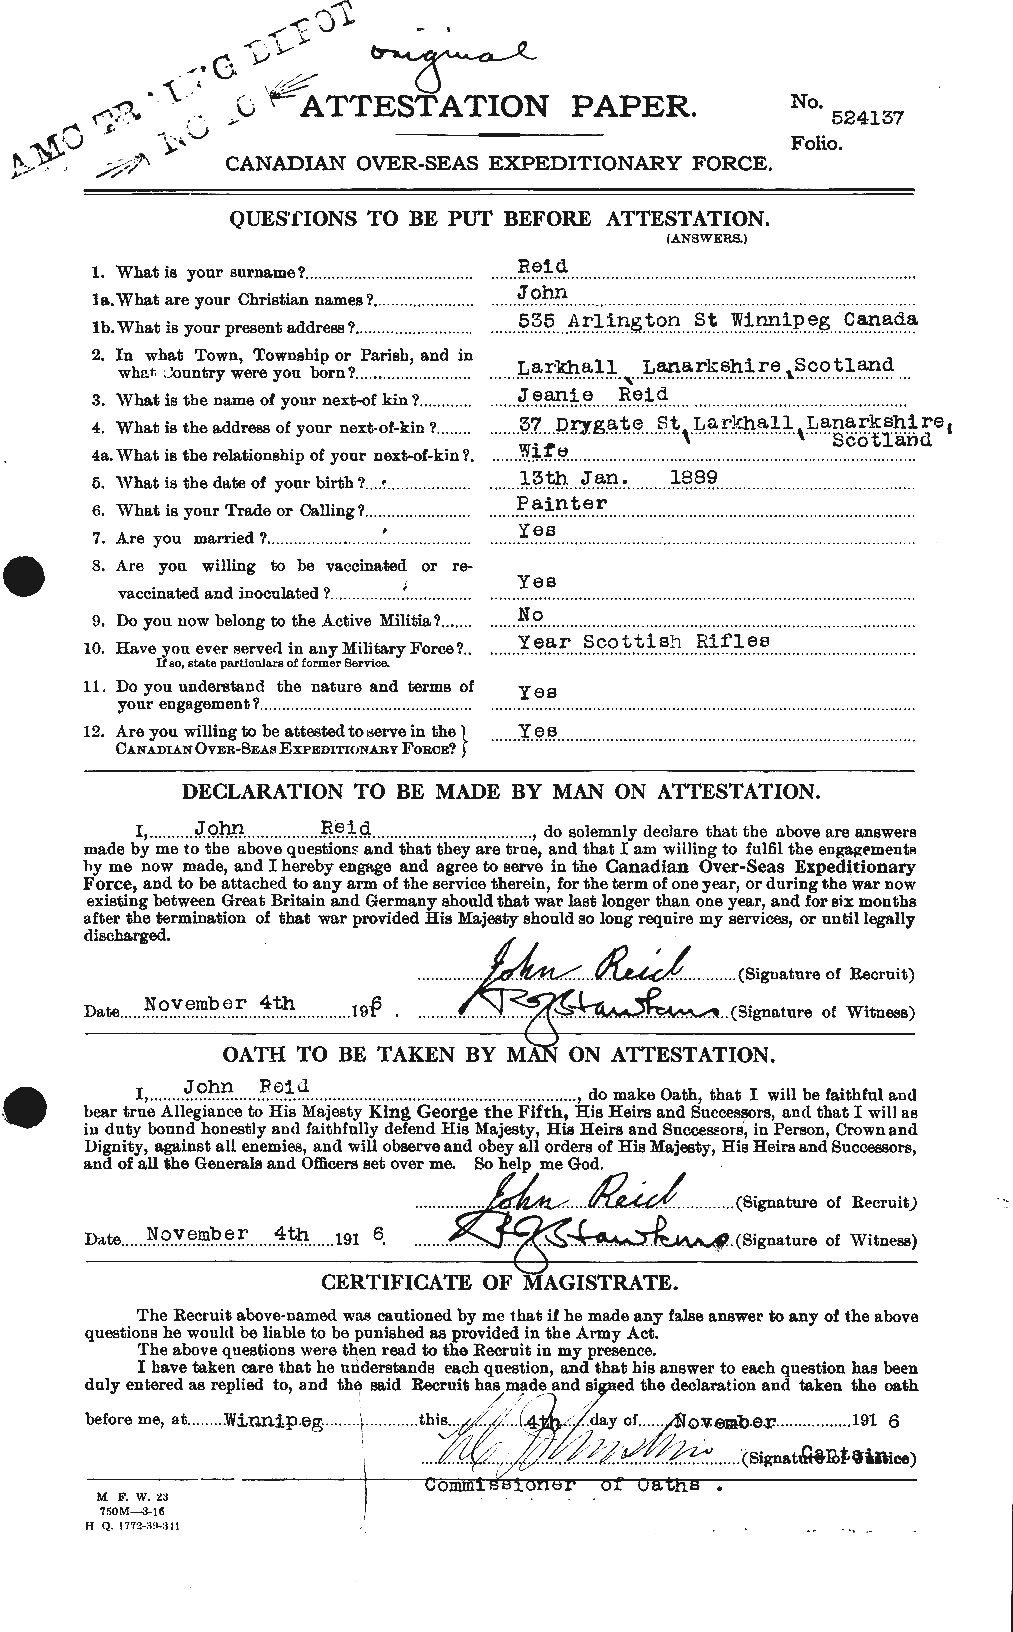 Personnel Records of the First World War - CEF 598752a